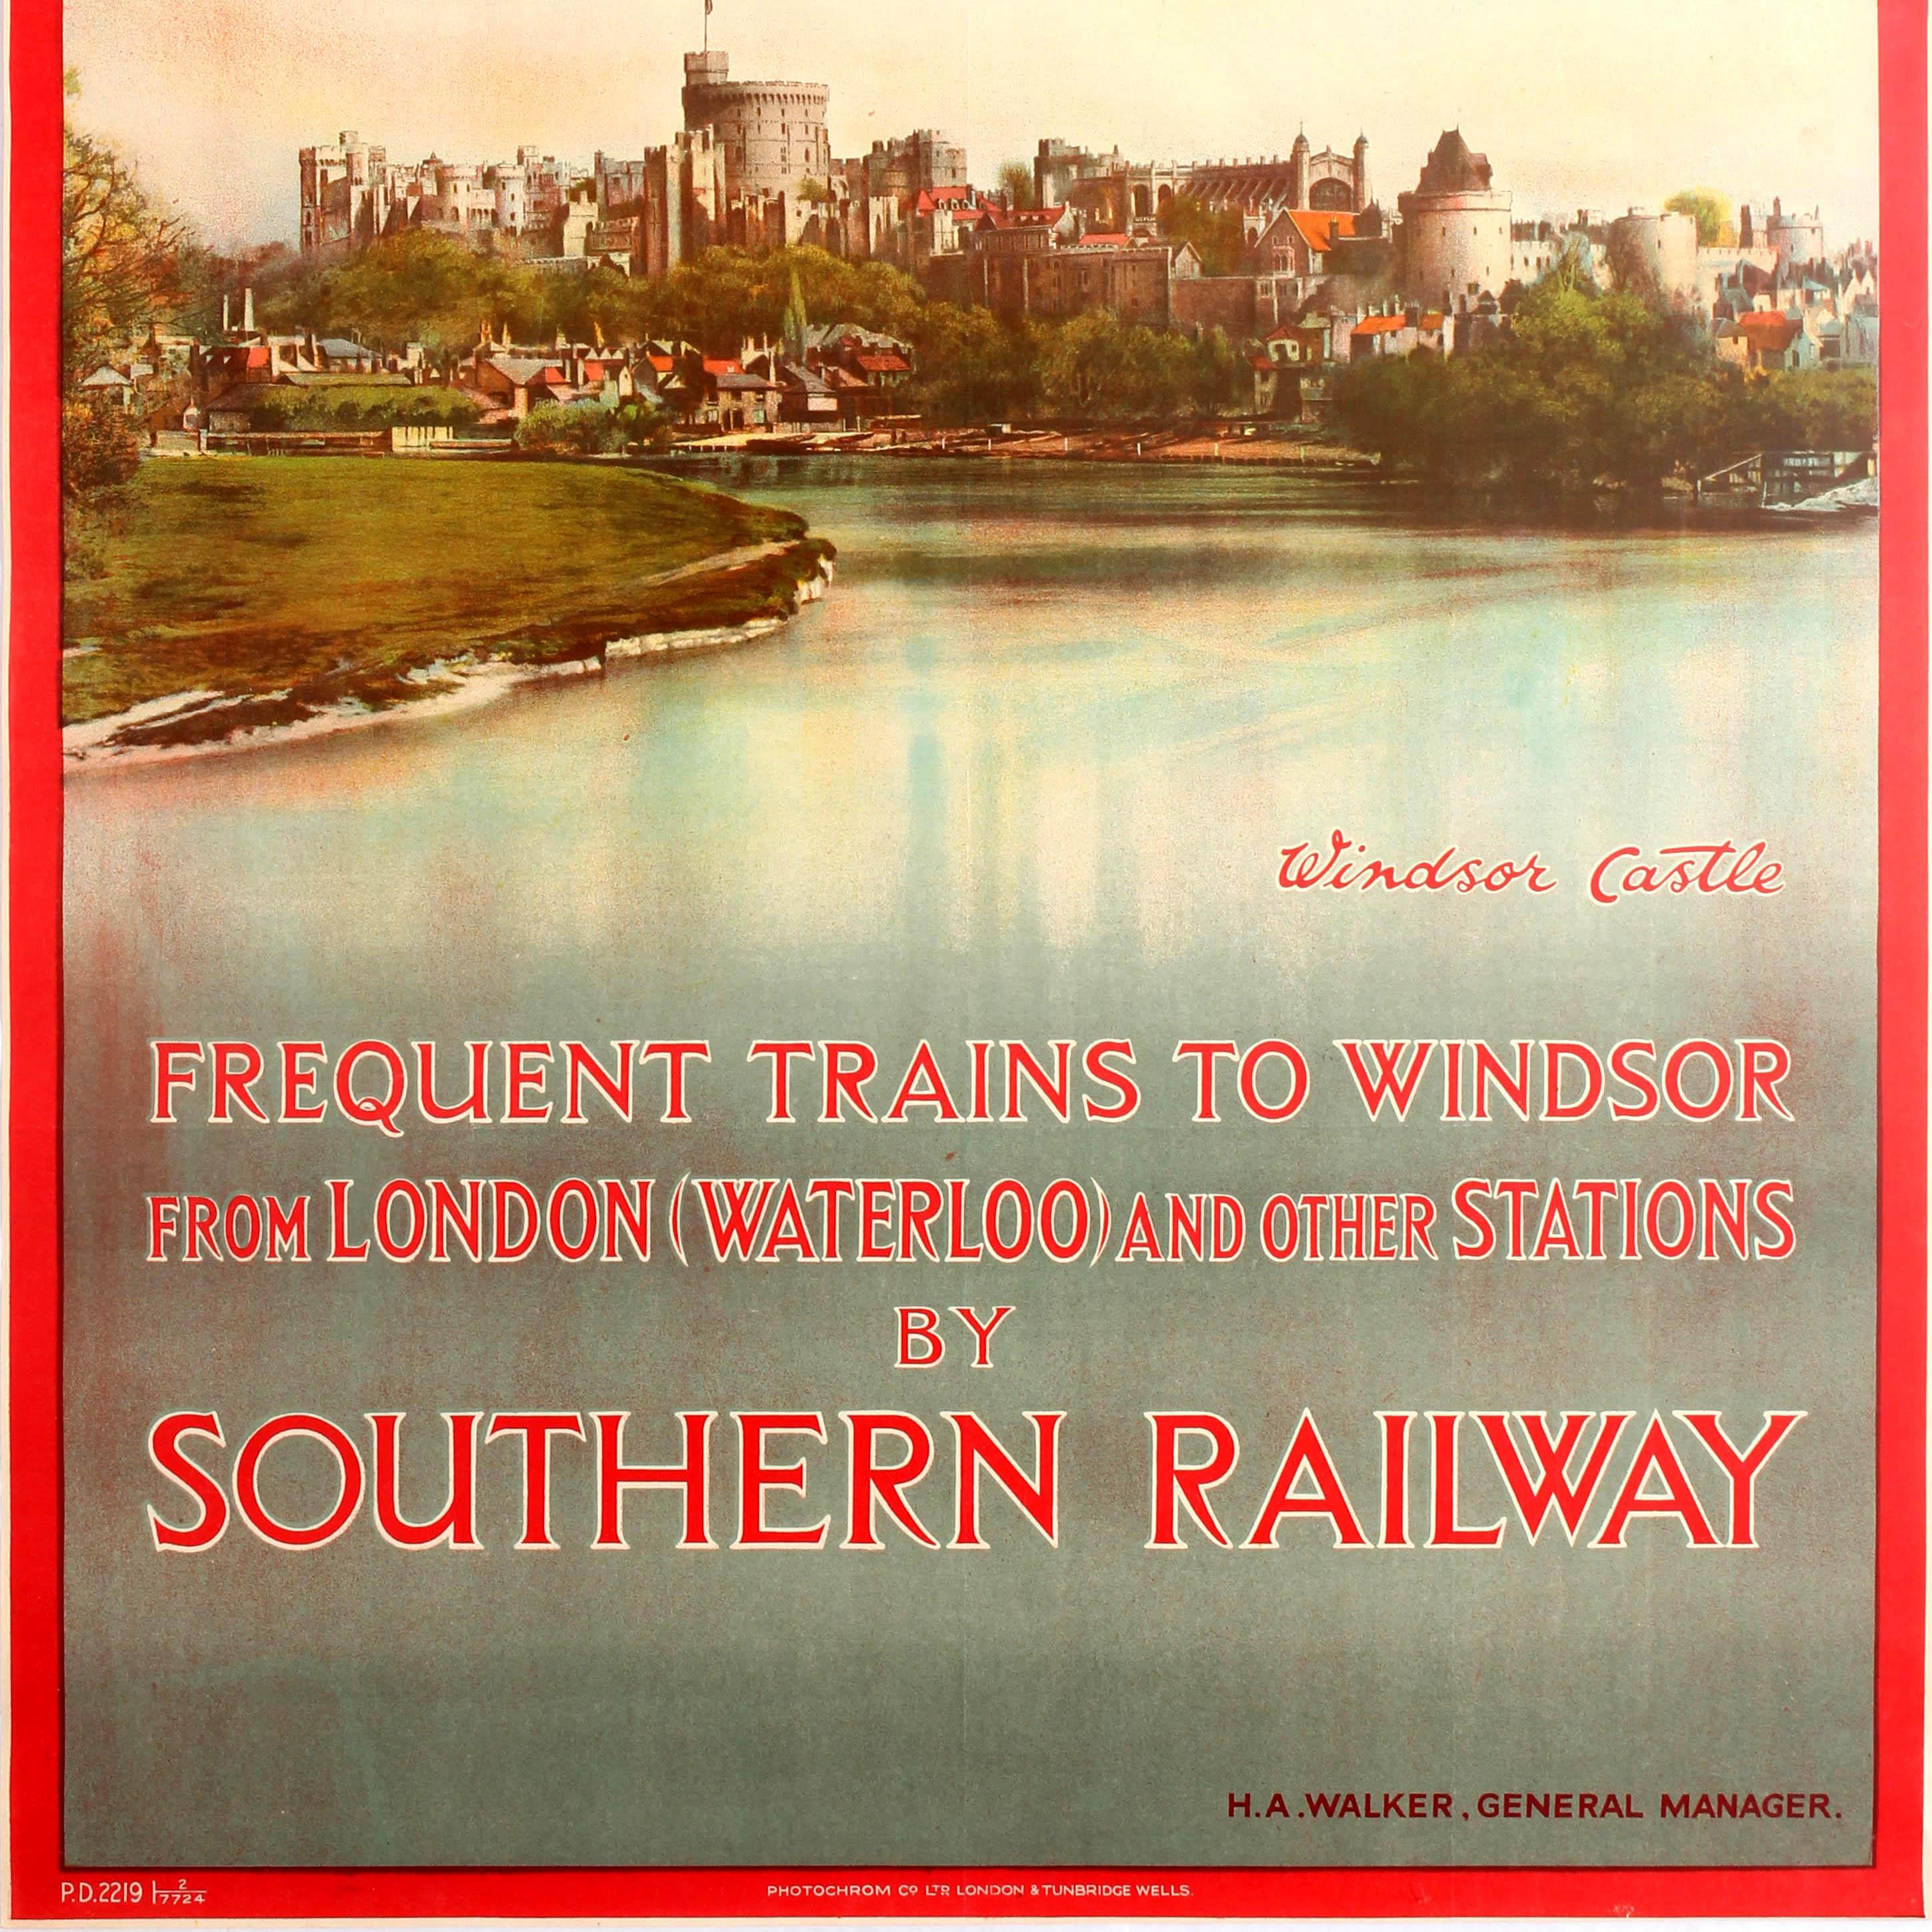 Original Vintage Southern Railway Travel Poster Featuring Windsor Castle England In Good Condition For Sale In London, GB